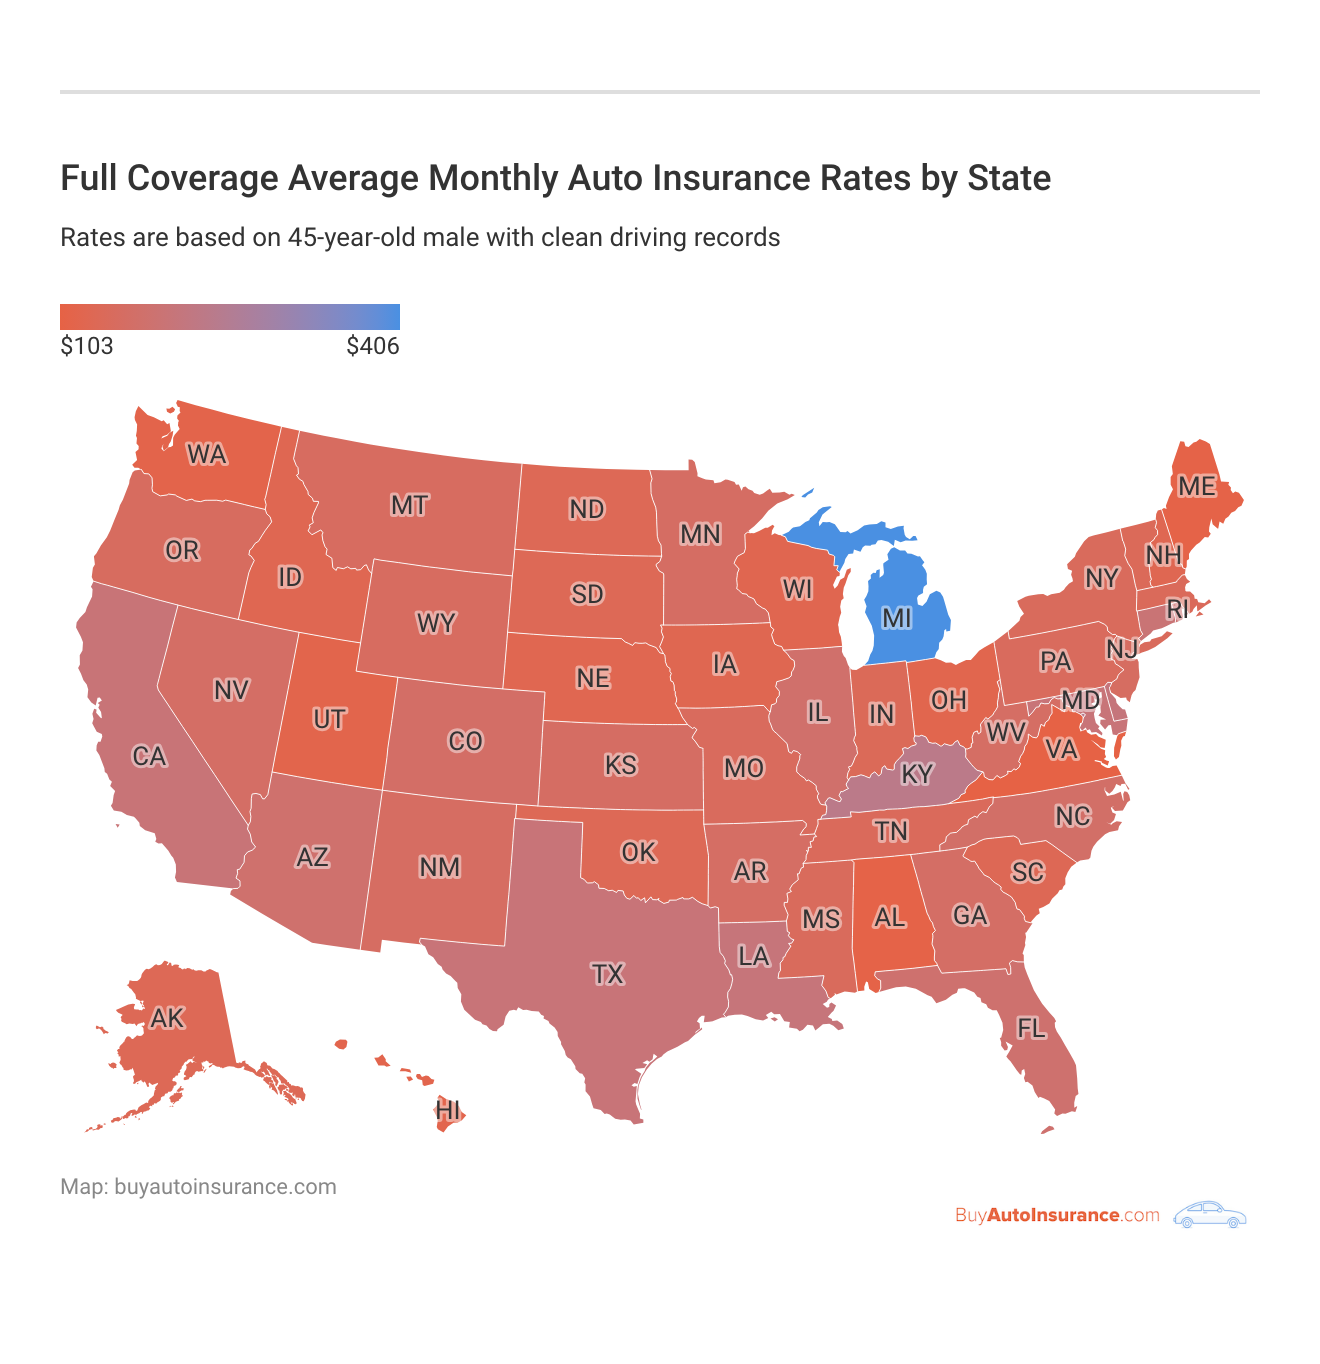 Full Coverage Average Monthly Auto Insurance Rates by State